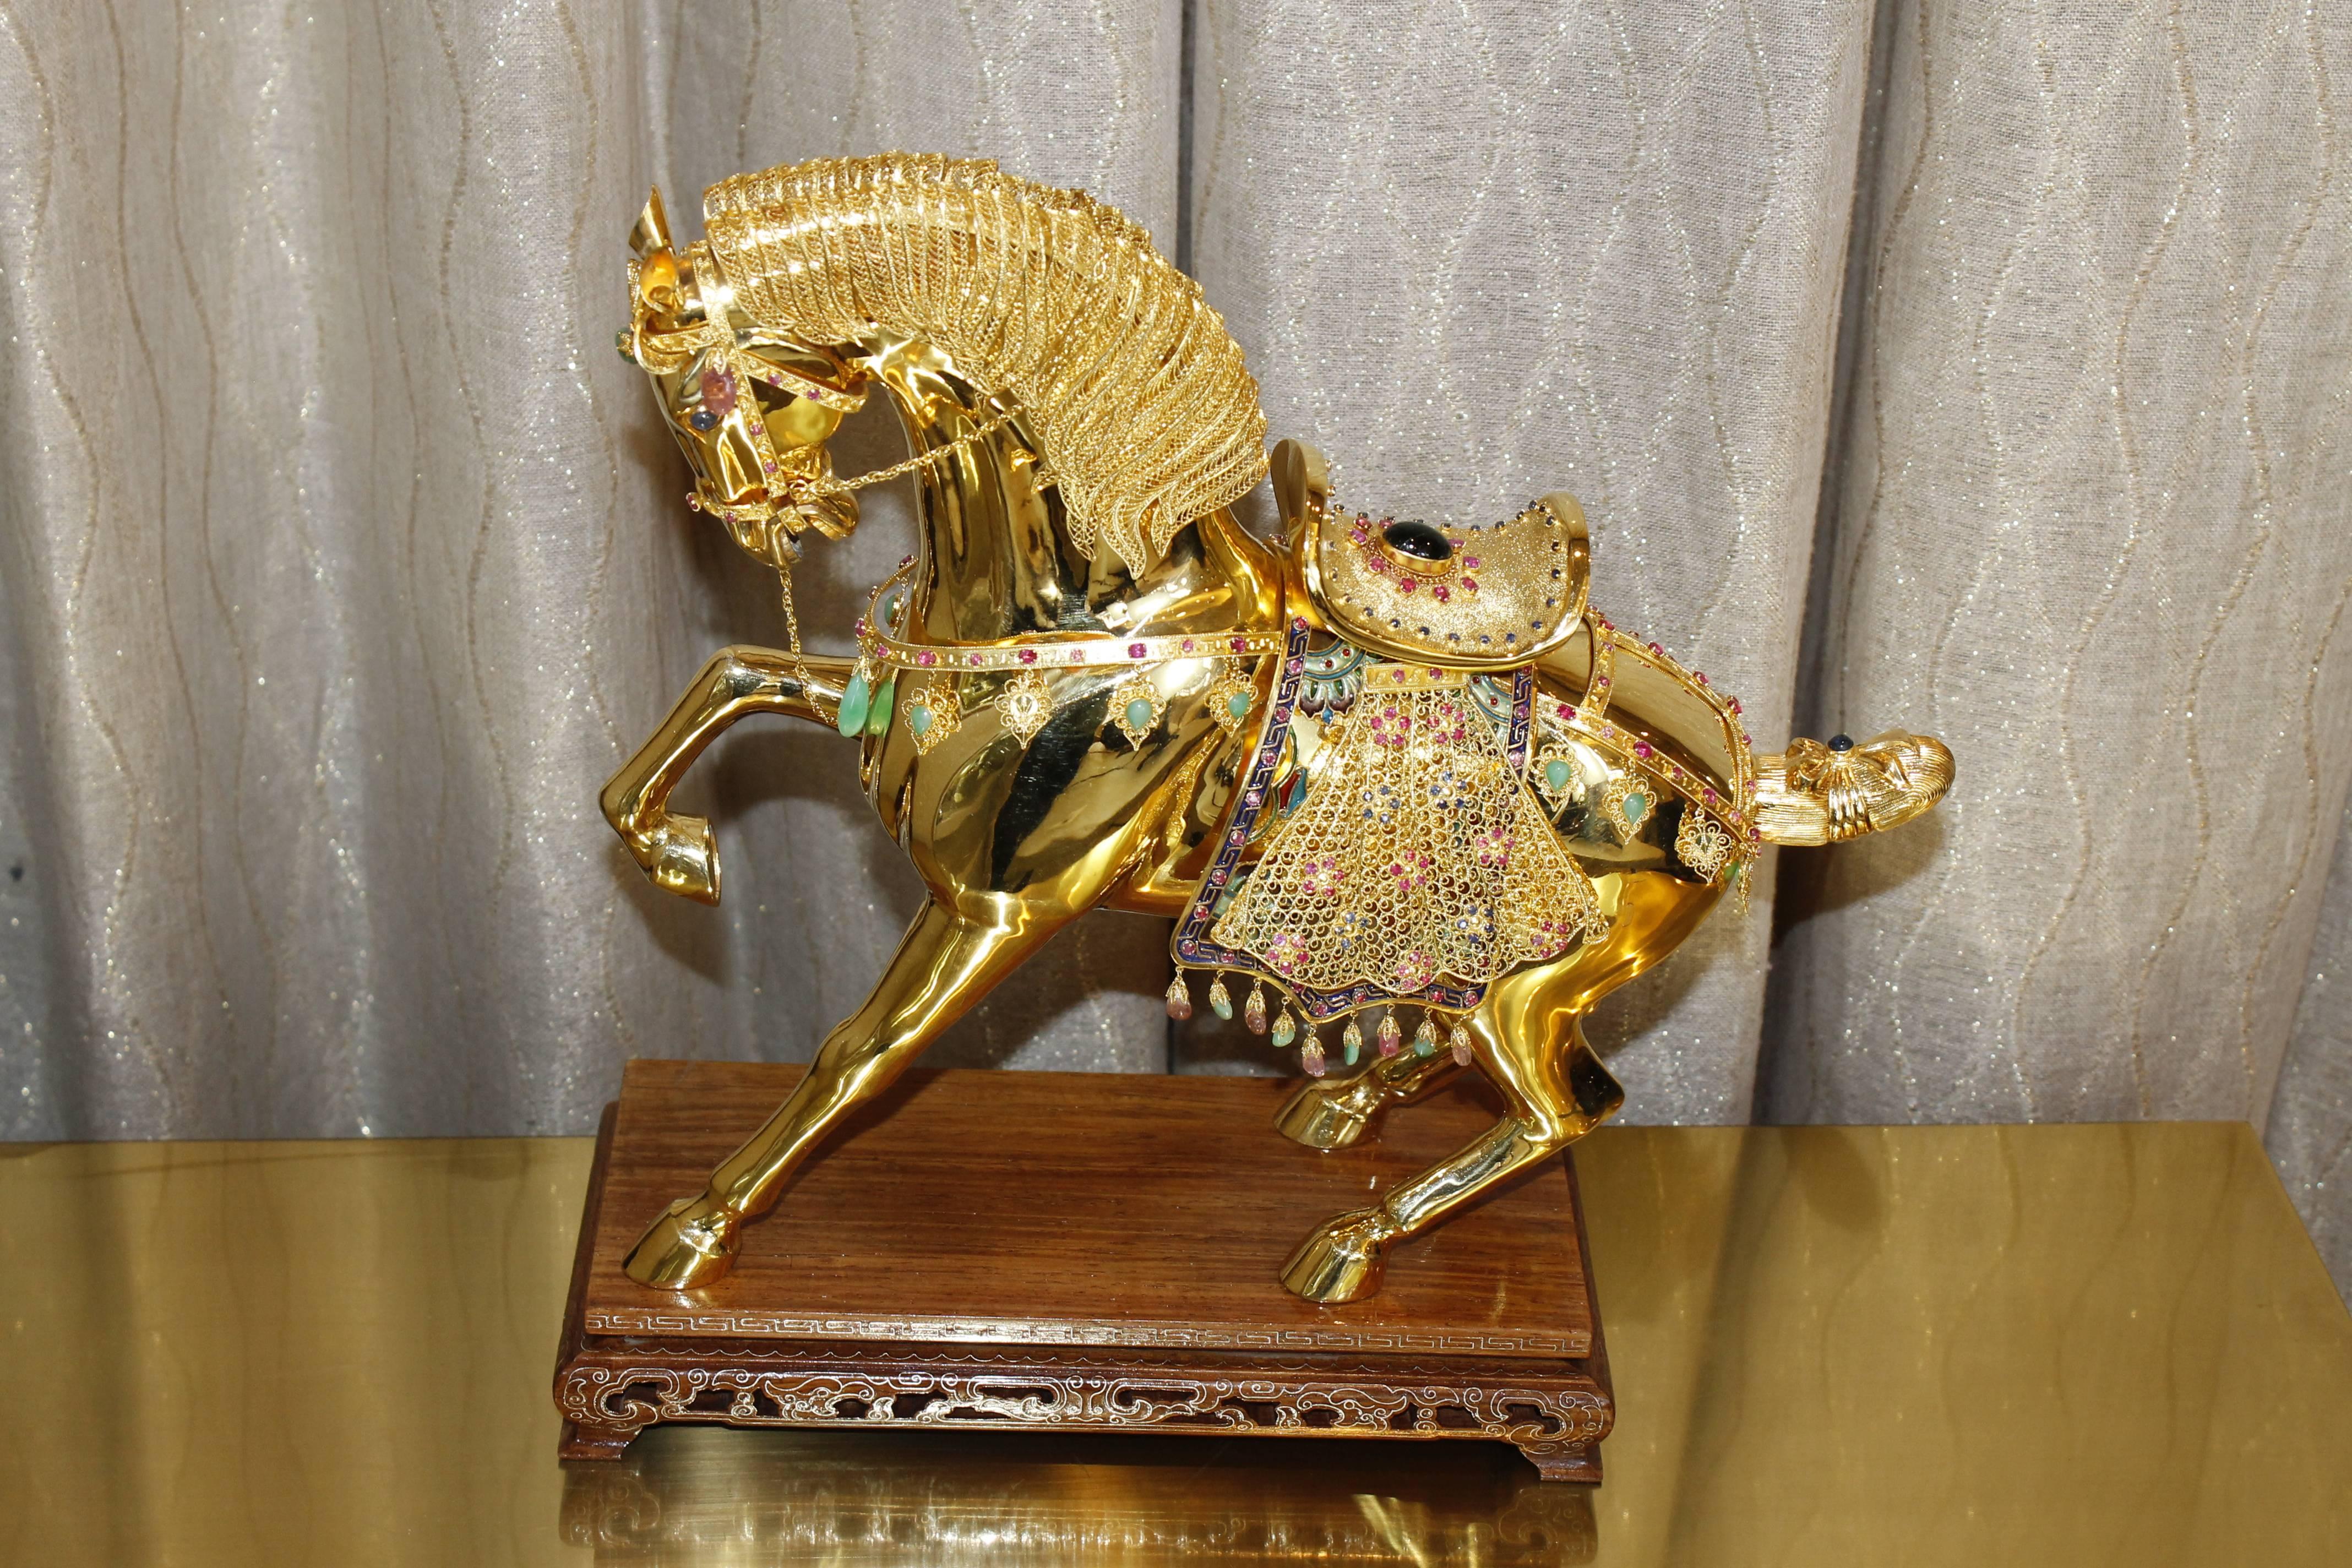 stamped 18K under hoof
the horse weights approx. 1242 grams 

12 inches wide; 10 inches high